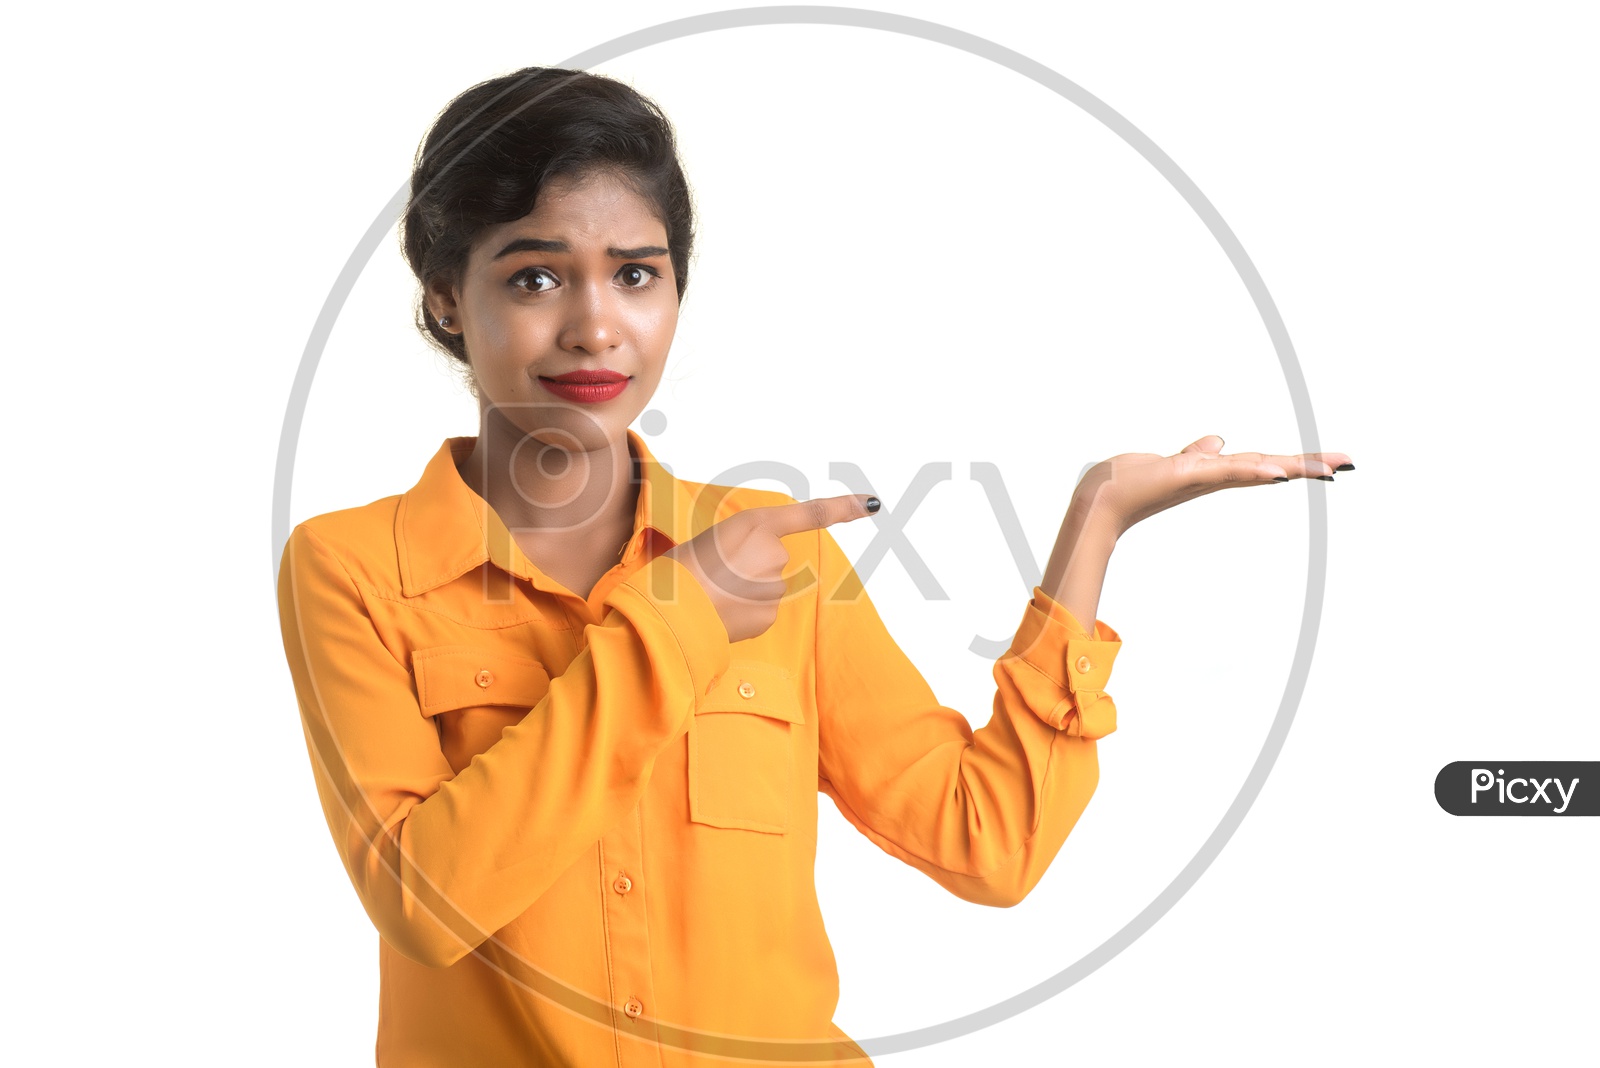 Young Pretty Girl Showing Space With an Expression on Face  on an Isolated White Background